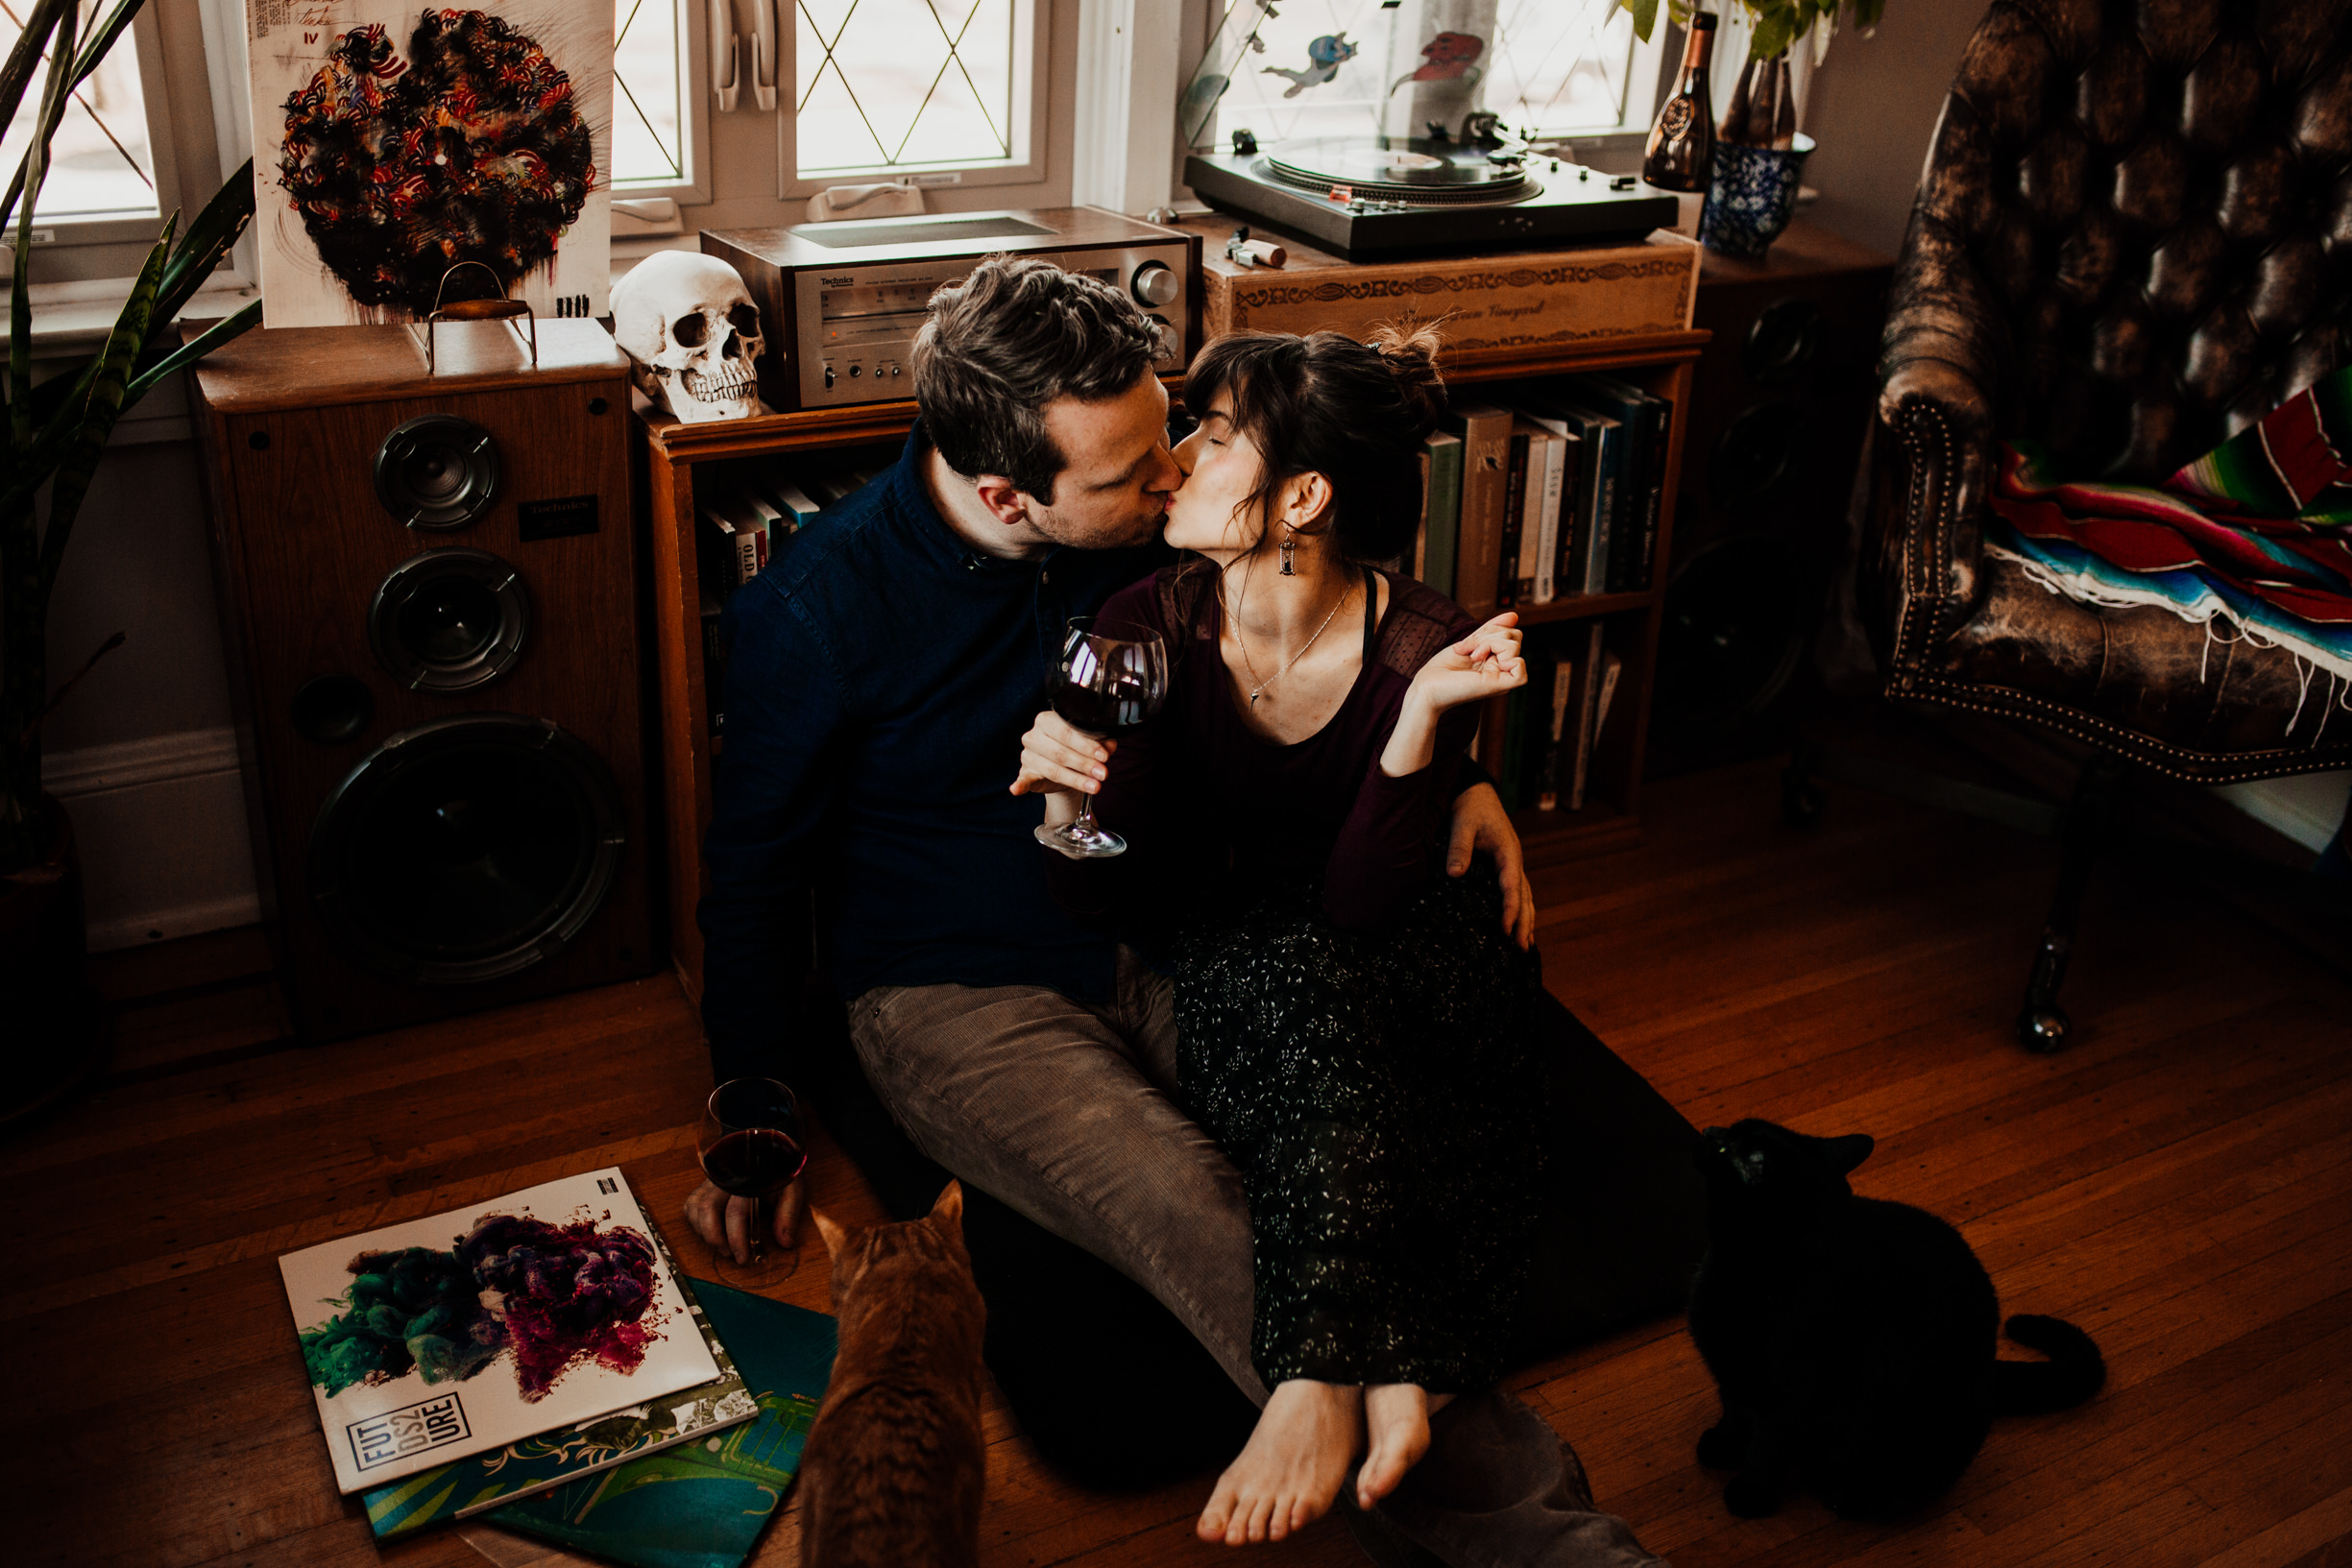 louisville-engagement-photographer-record-store-in-home-session-crystal-ludwick-photo (29 of 53).jpg